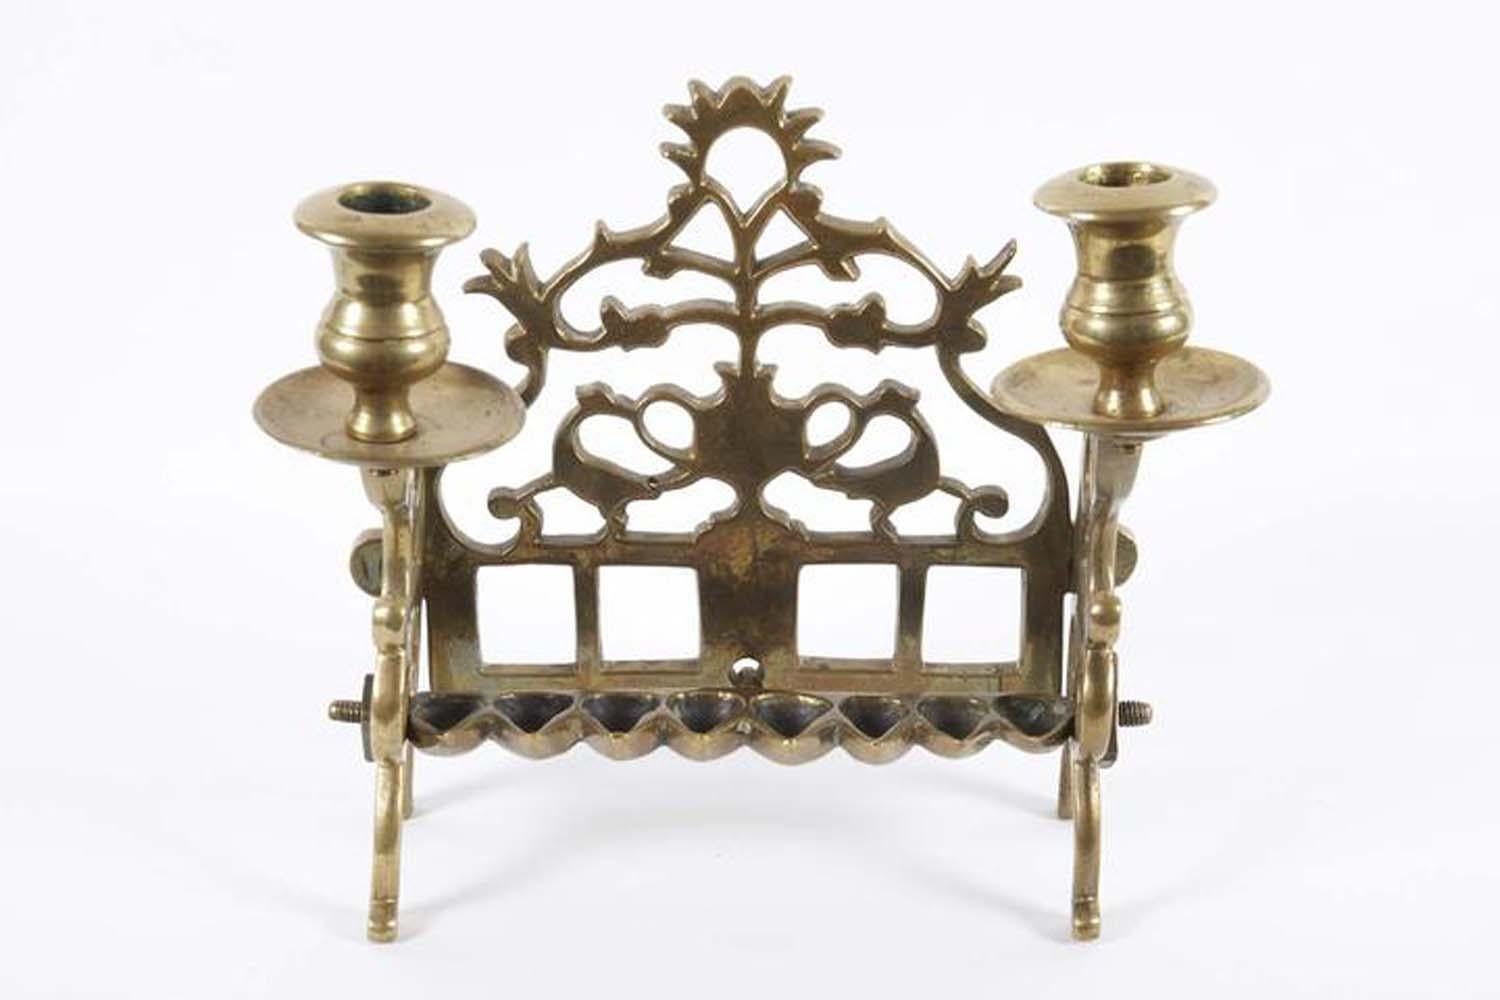 The backplate is cast and pierced with a central two-handled vase of flowers, flanked by fully formed birds with their heads turned outward. The side panels fitted with two servant lights, fronted by a row of eight oil fonts. Scholars theorize that